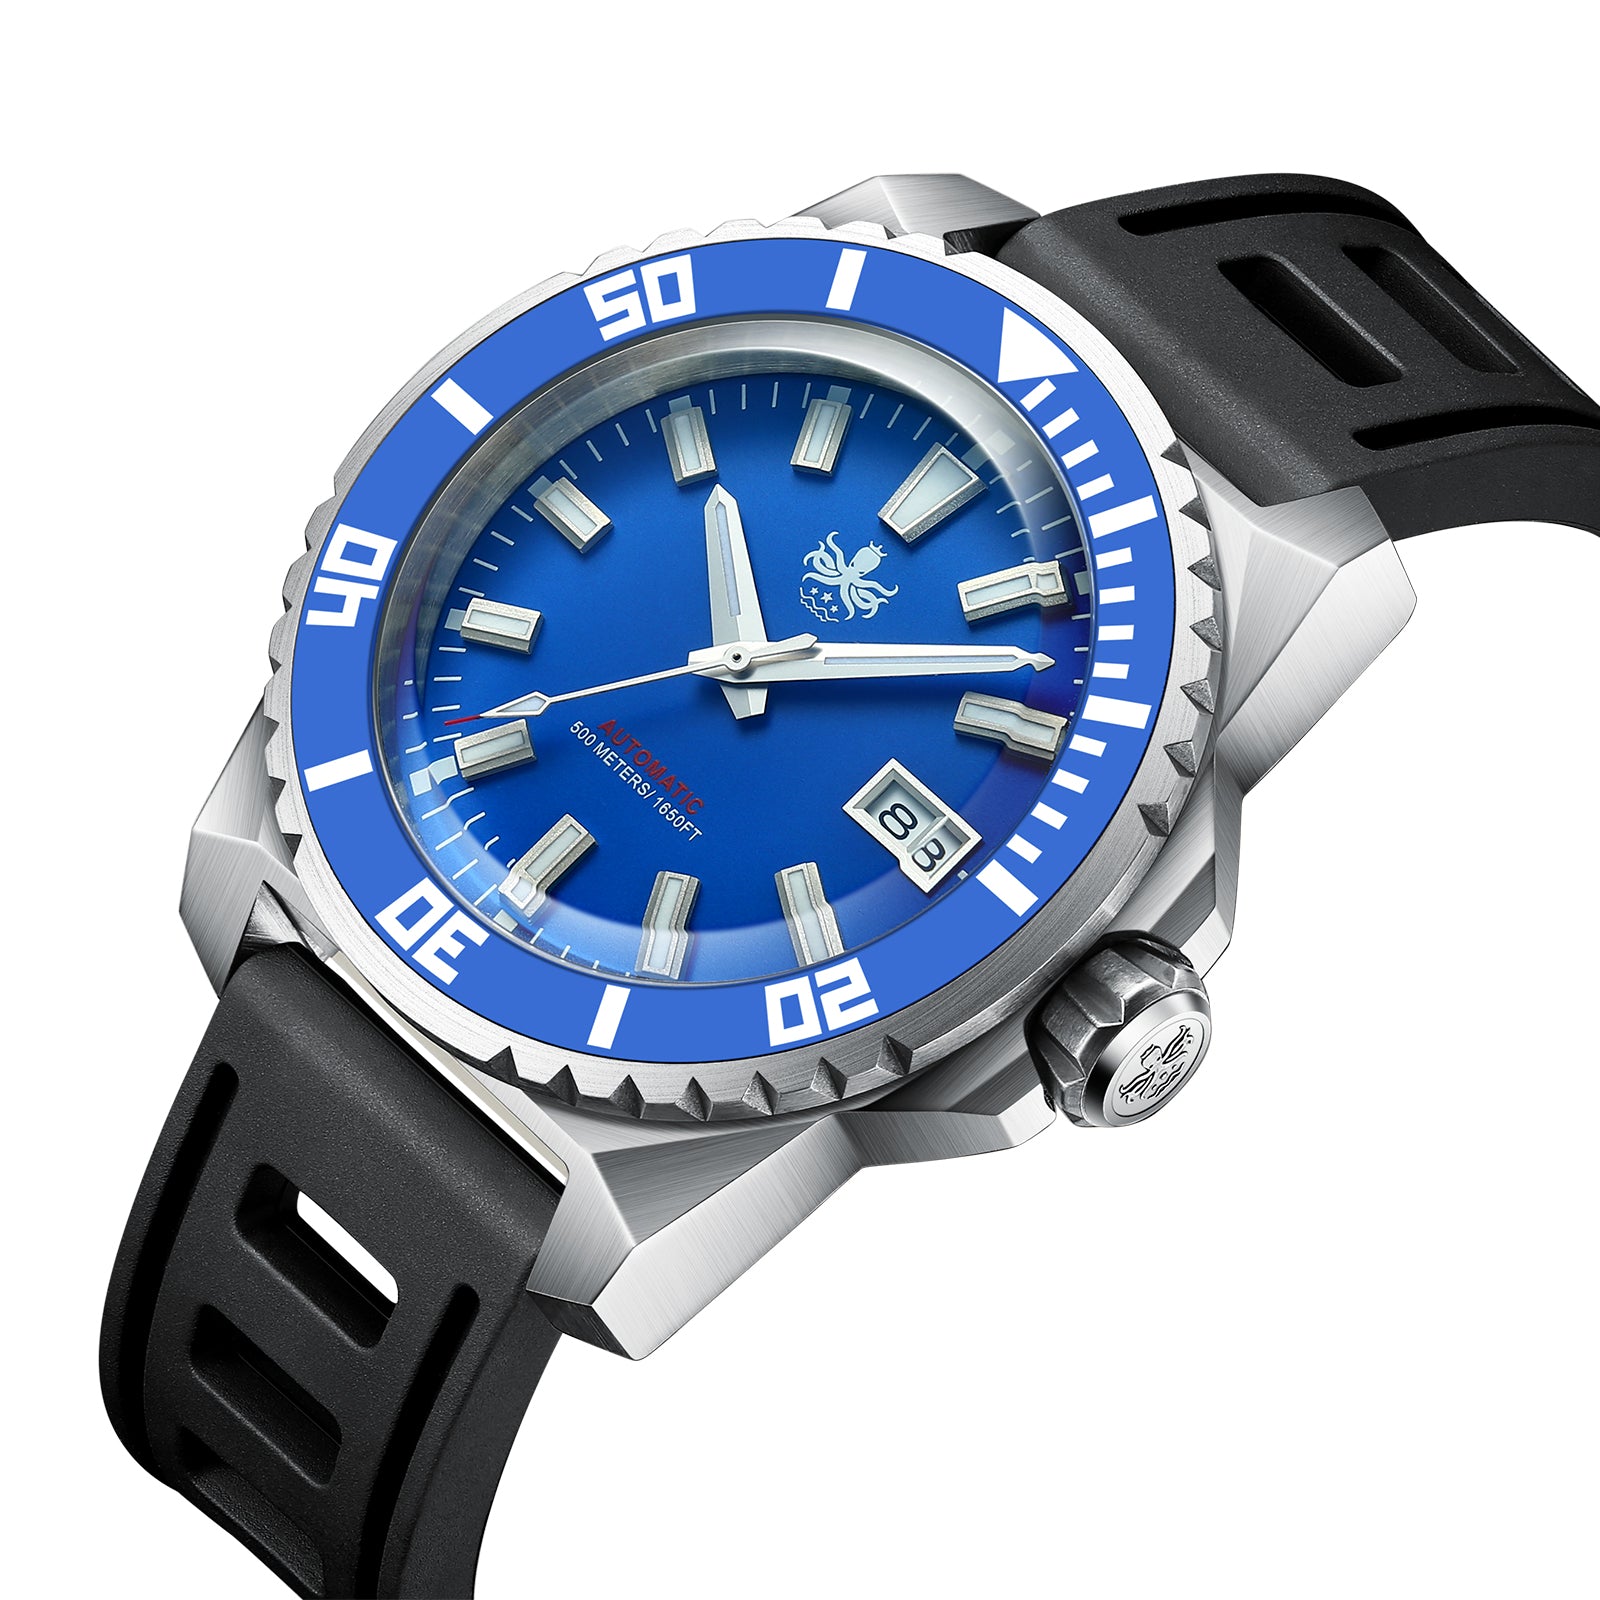 Biatec Leviathan 01 diving automatic Watch | Leviathan, Automatic watch,  Stainless steel case